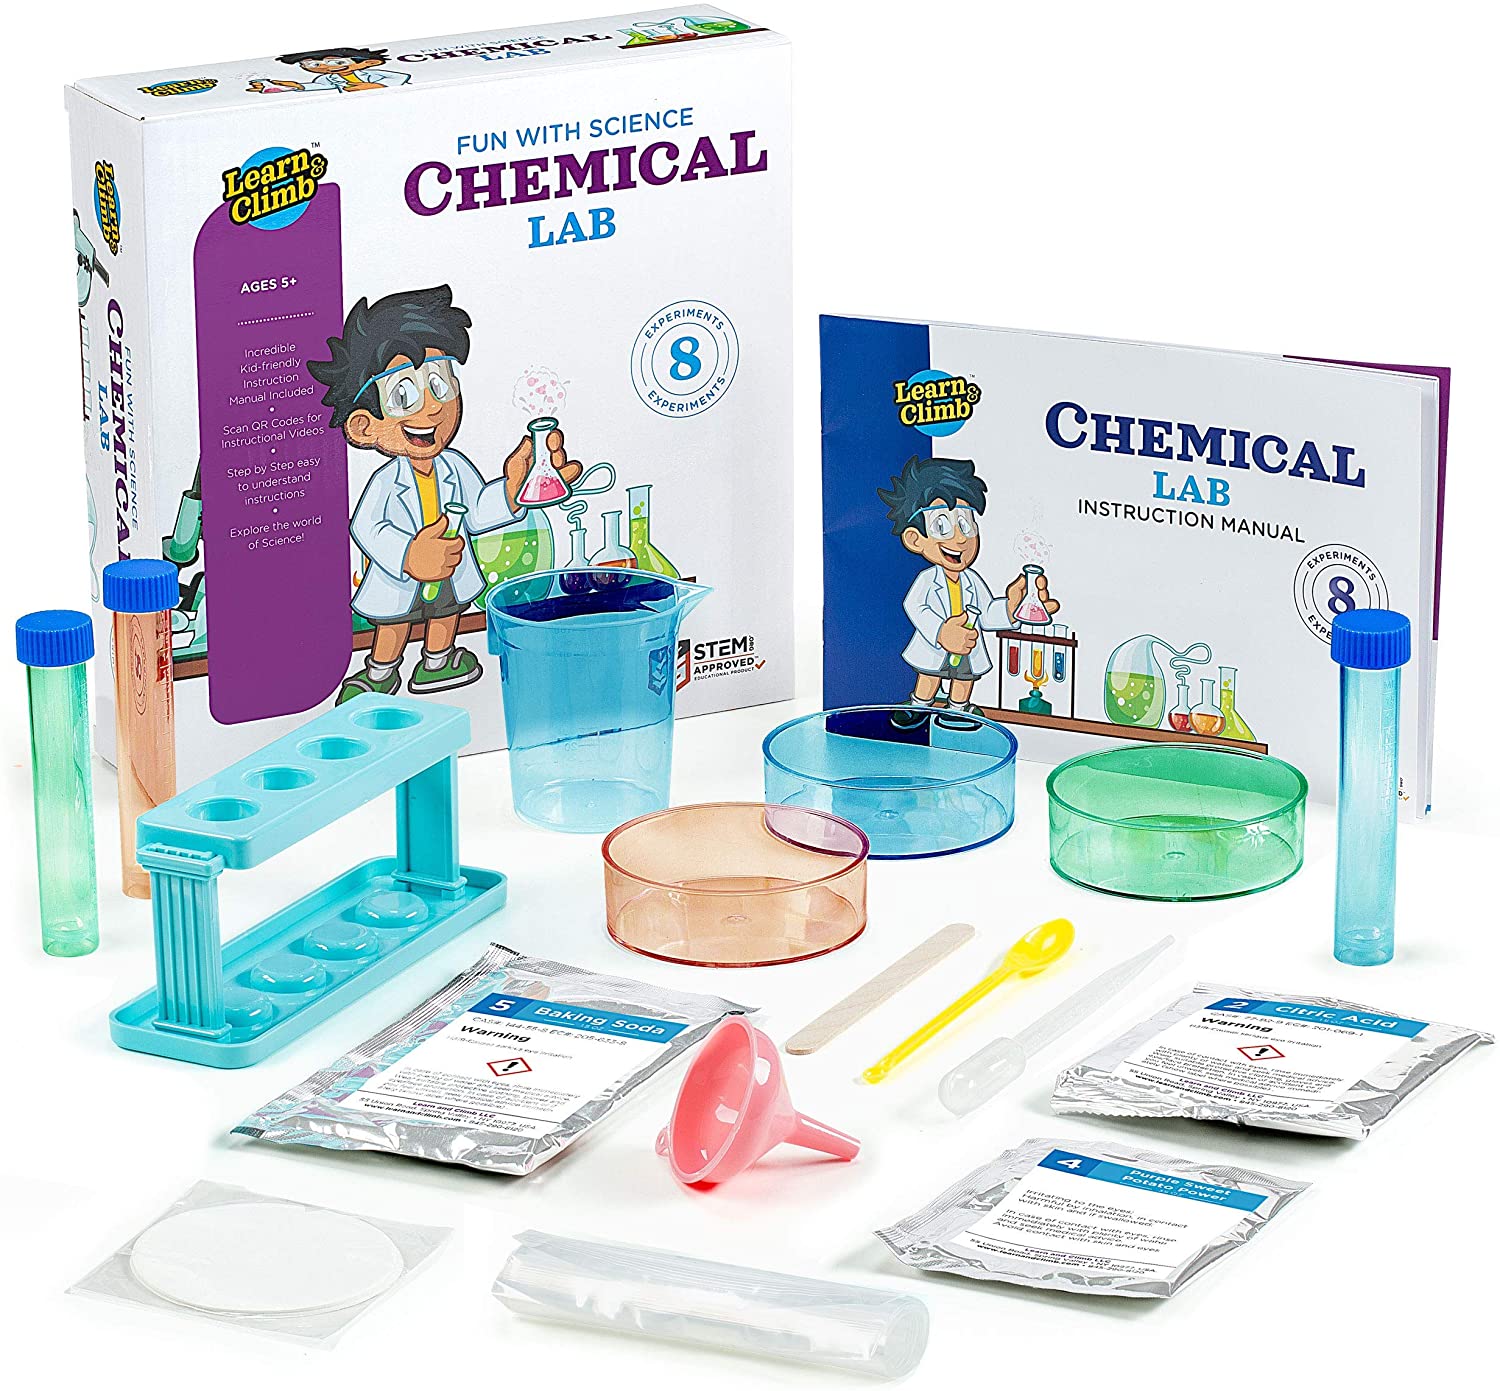 Learn & Climb Science Kits for Kids Age 5 Plus. 8 Chemistry Experiments, Step-by-Step Manual. Gift for Girls & Boys 5,6,7,8